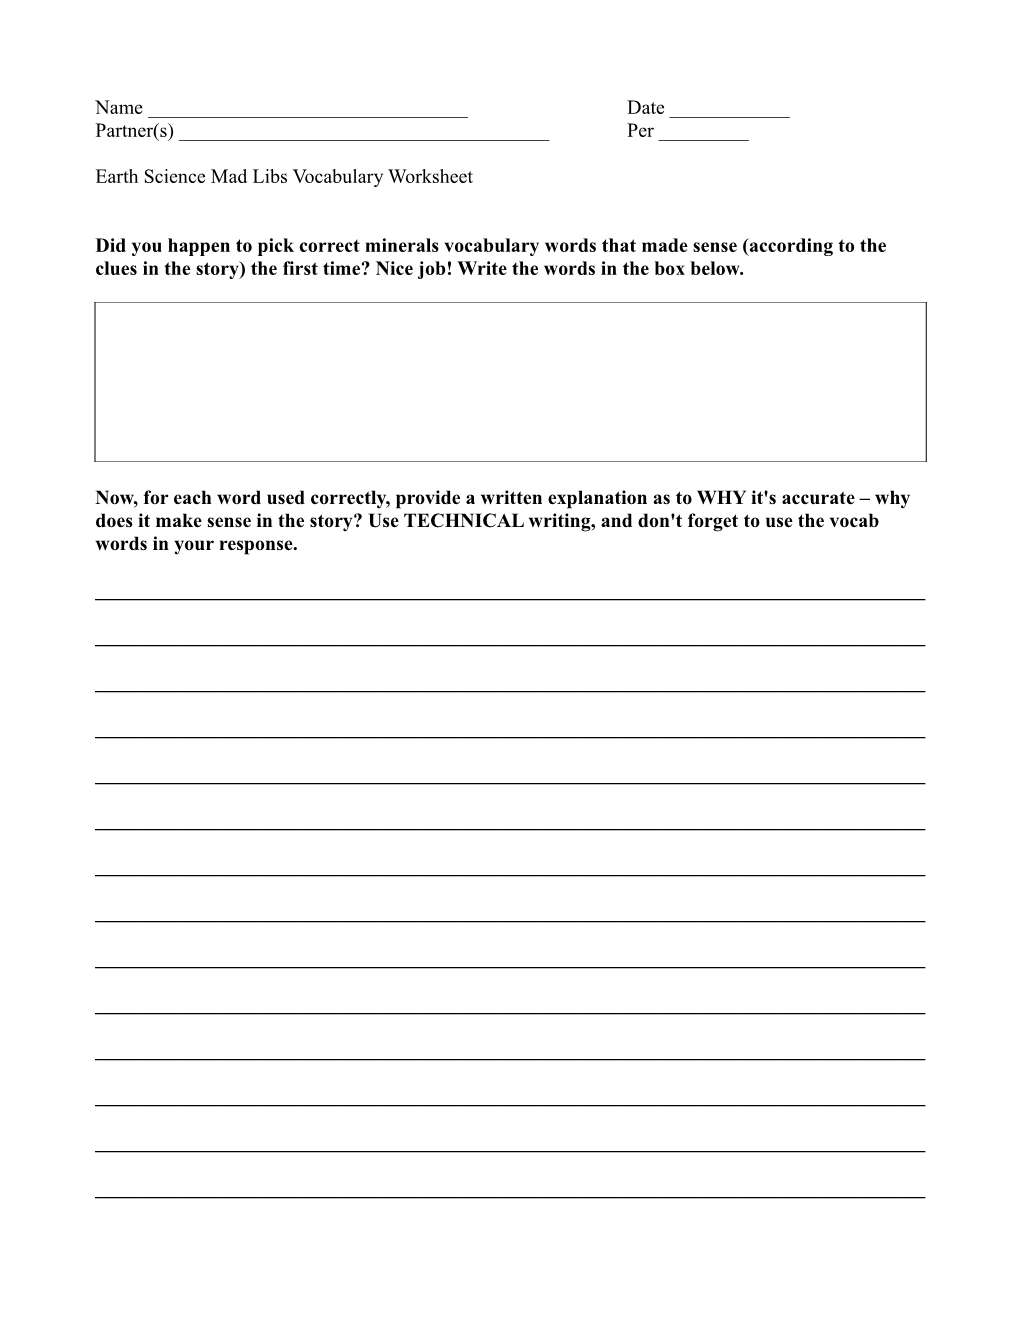 Earth Science Mad Libs Vocabulary Worksheet